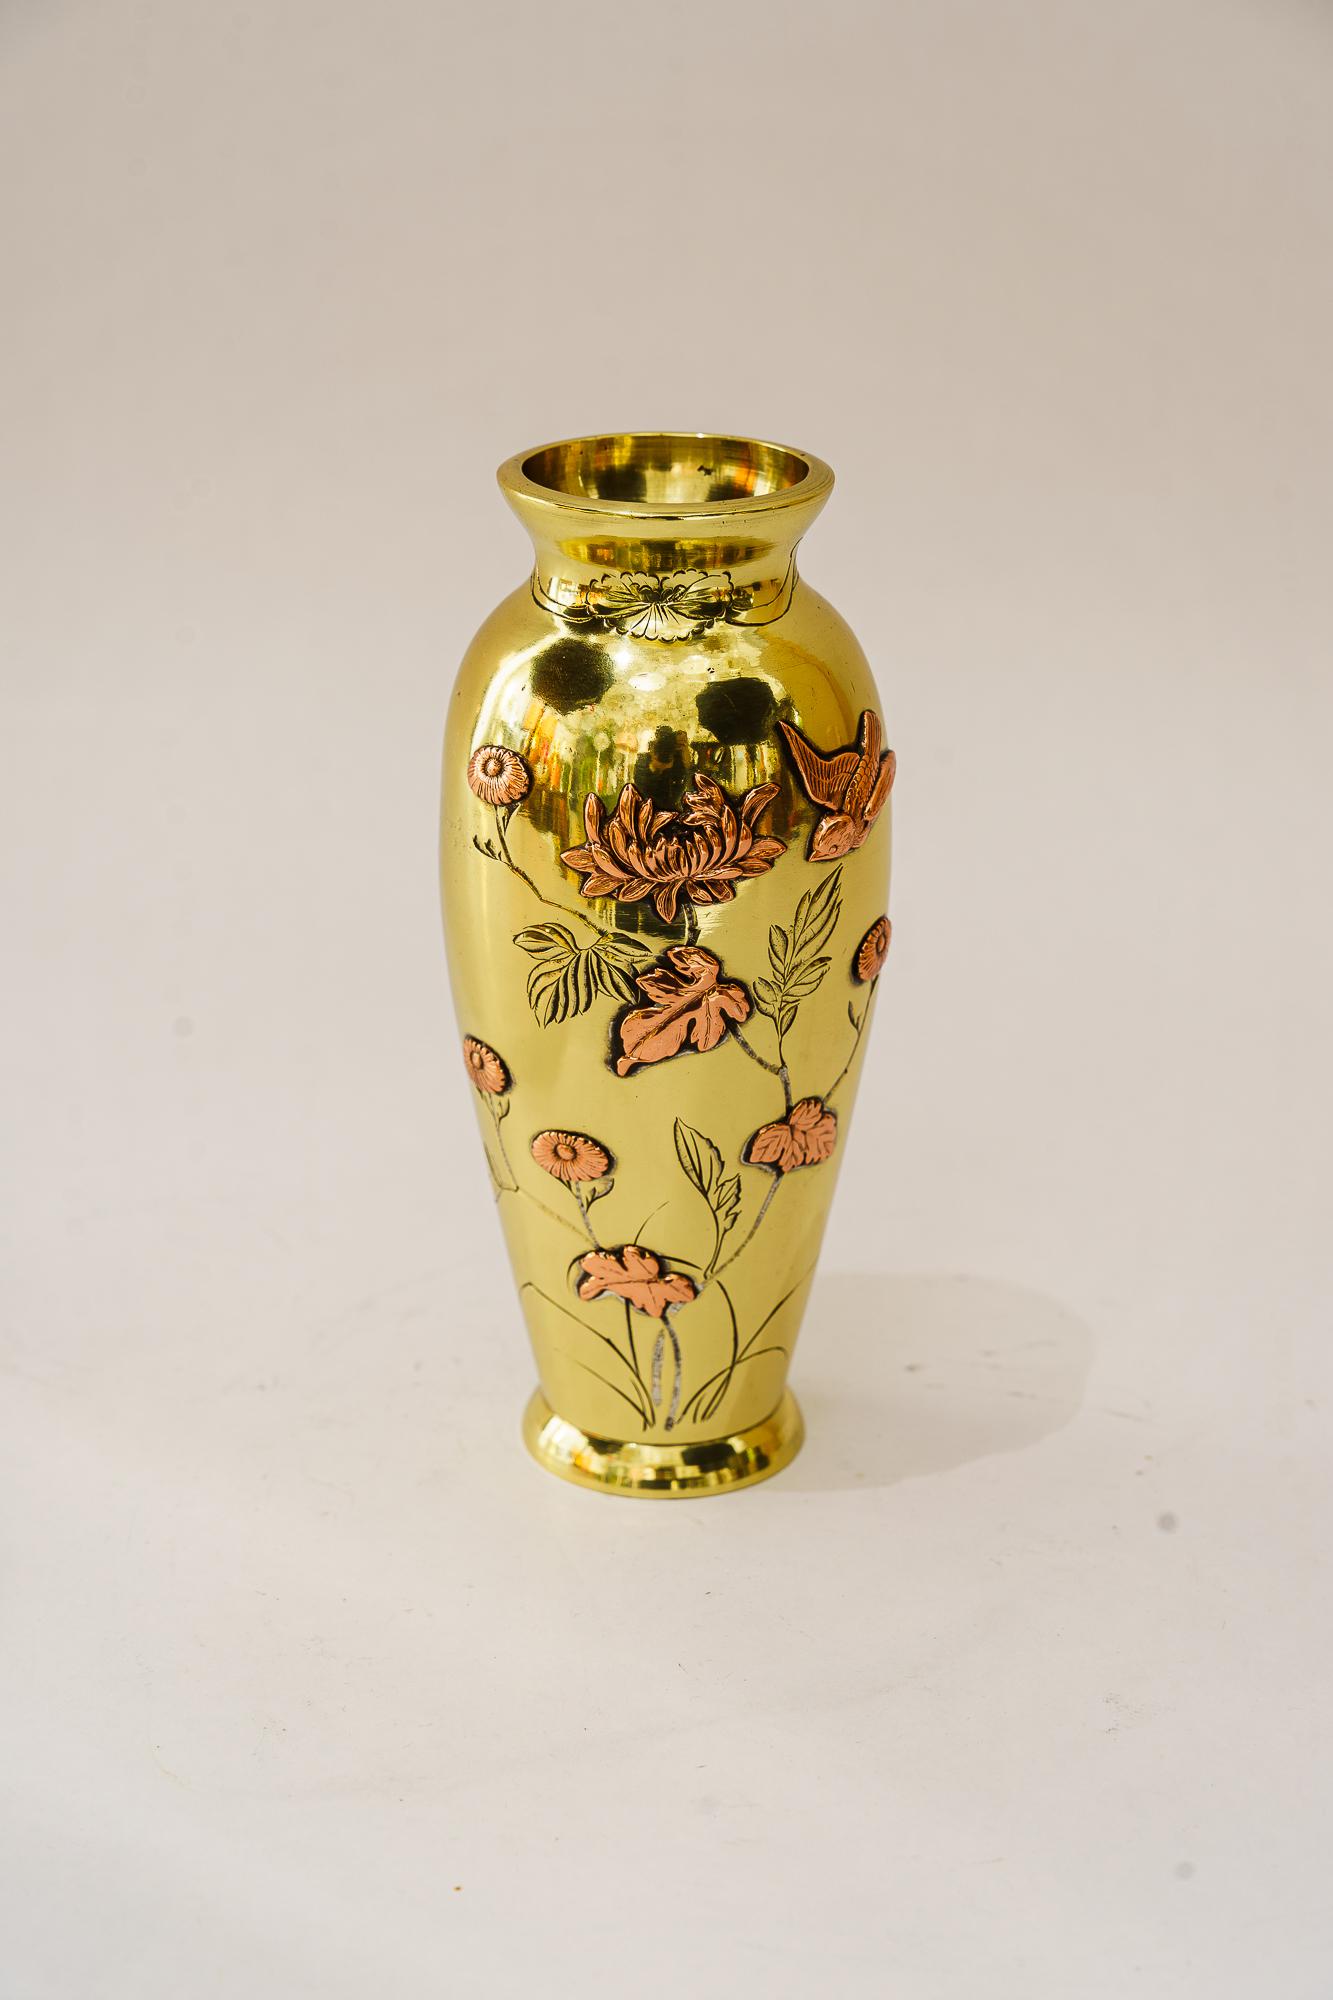 Art Deco Vase brass and copper conbination vienna around 1920s
Polished and stove enameled